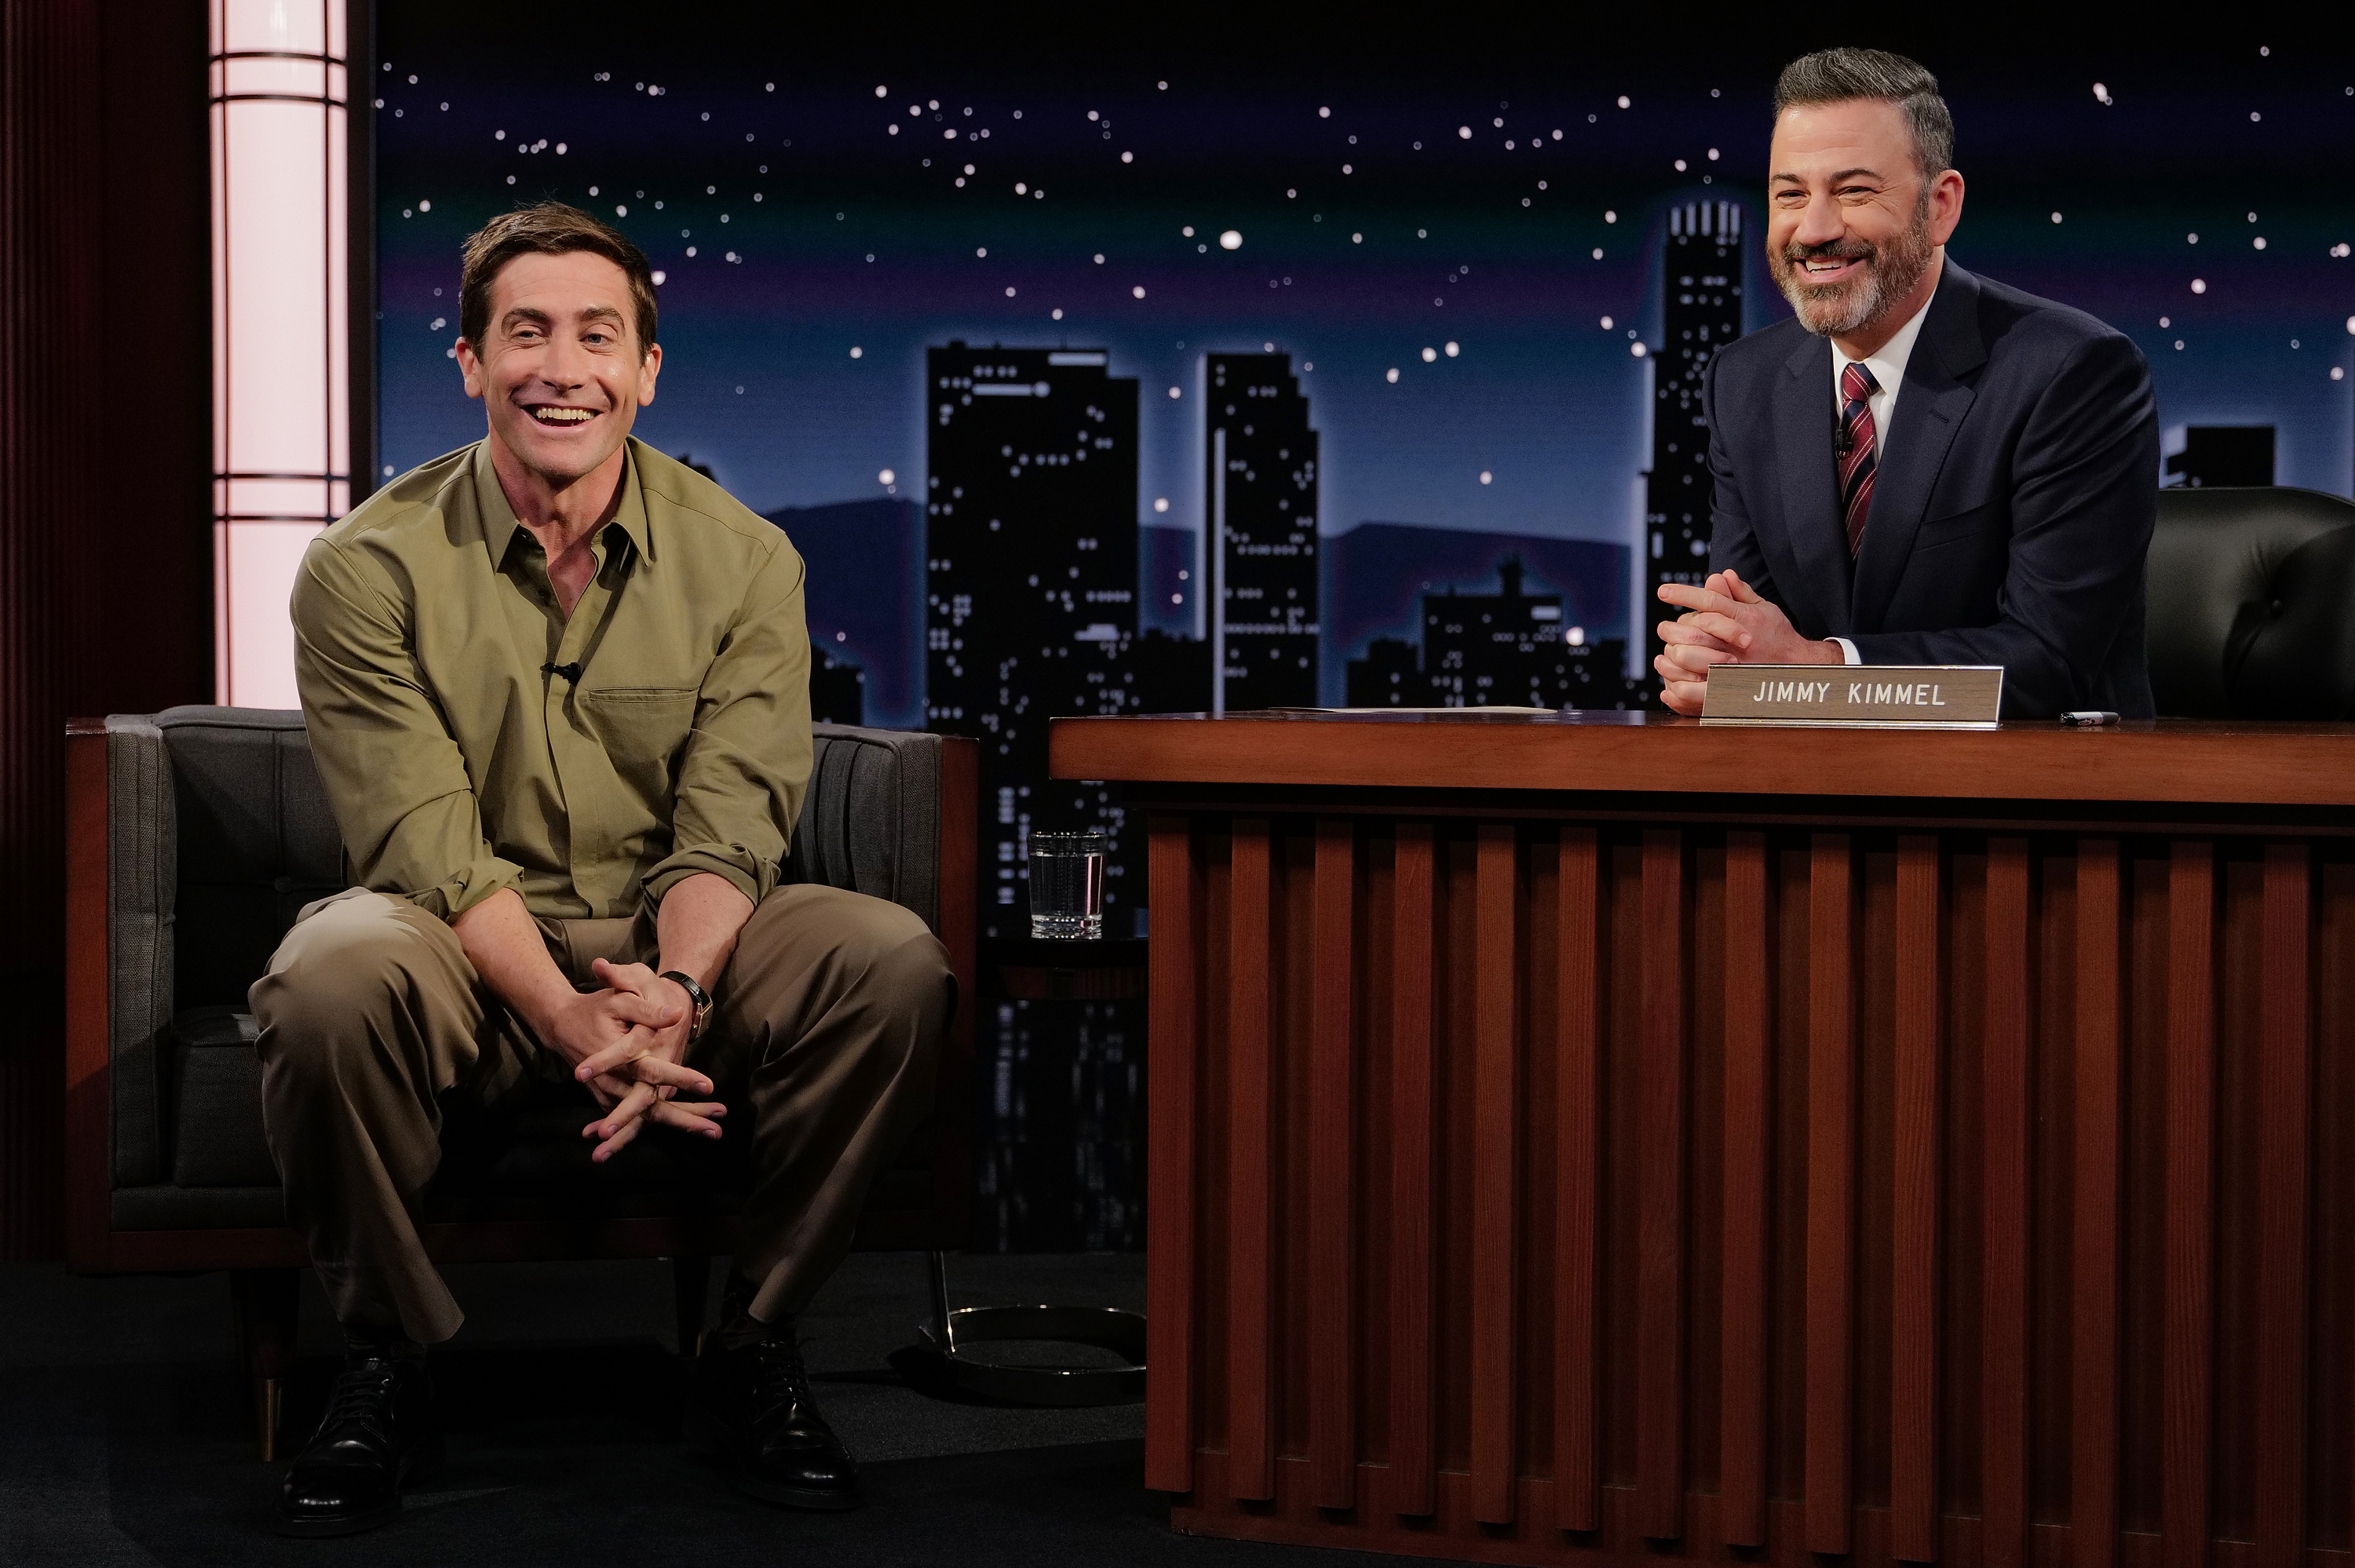 Jimmy interviewing Jake Gyllenhaal on his show